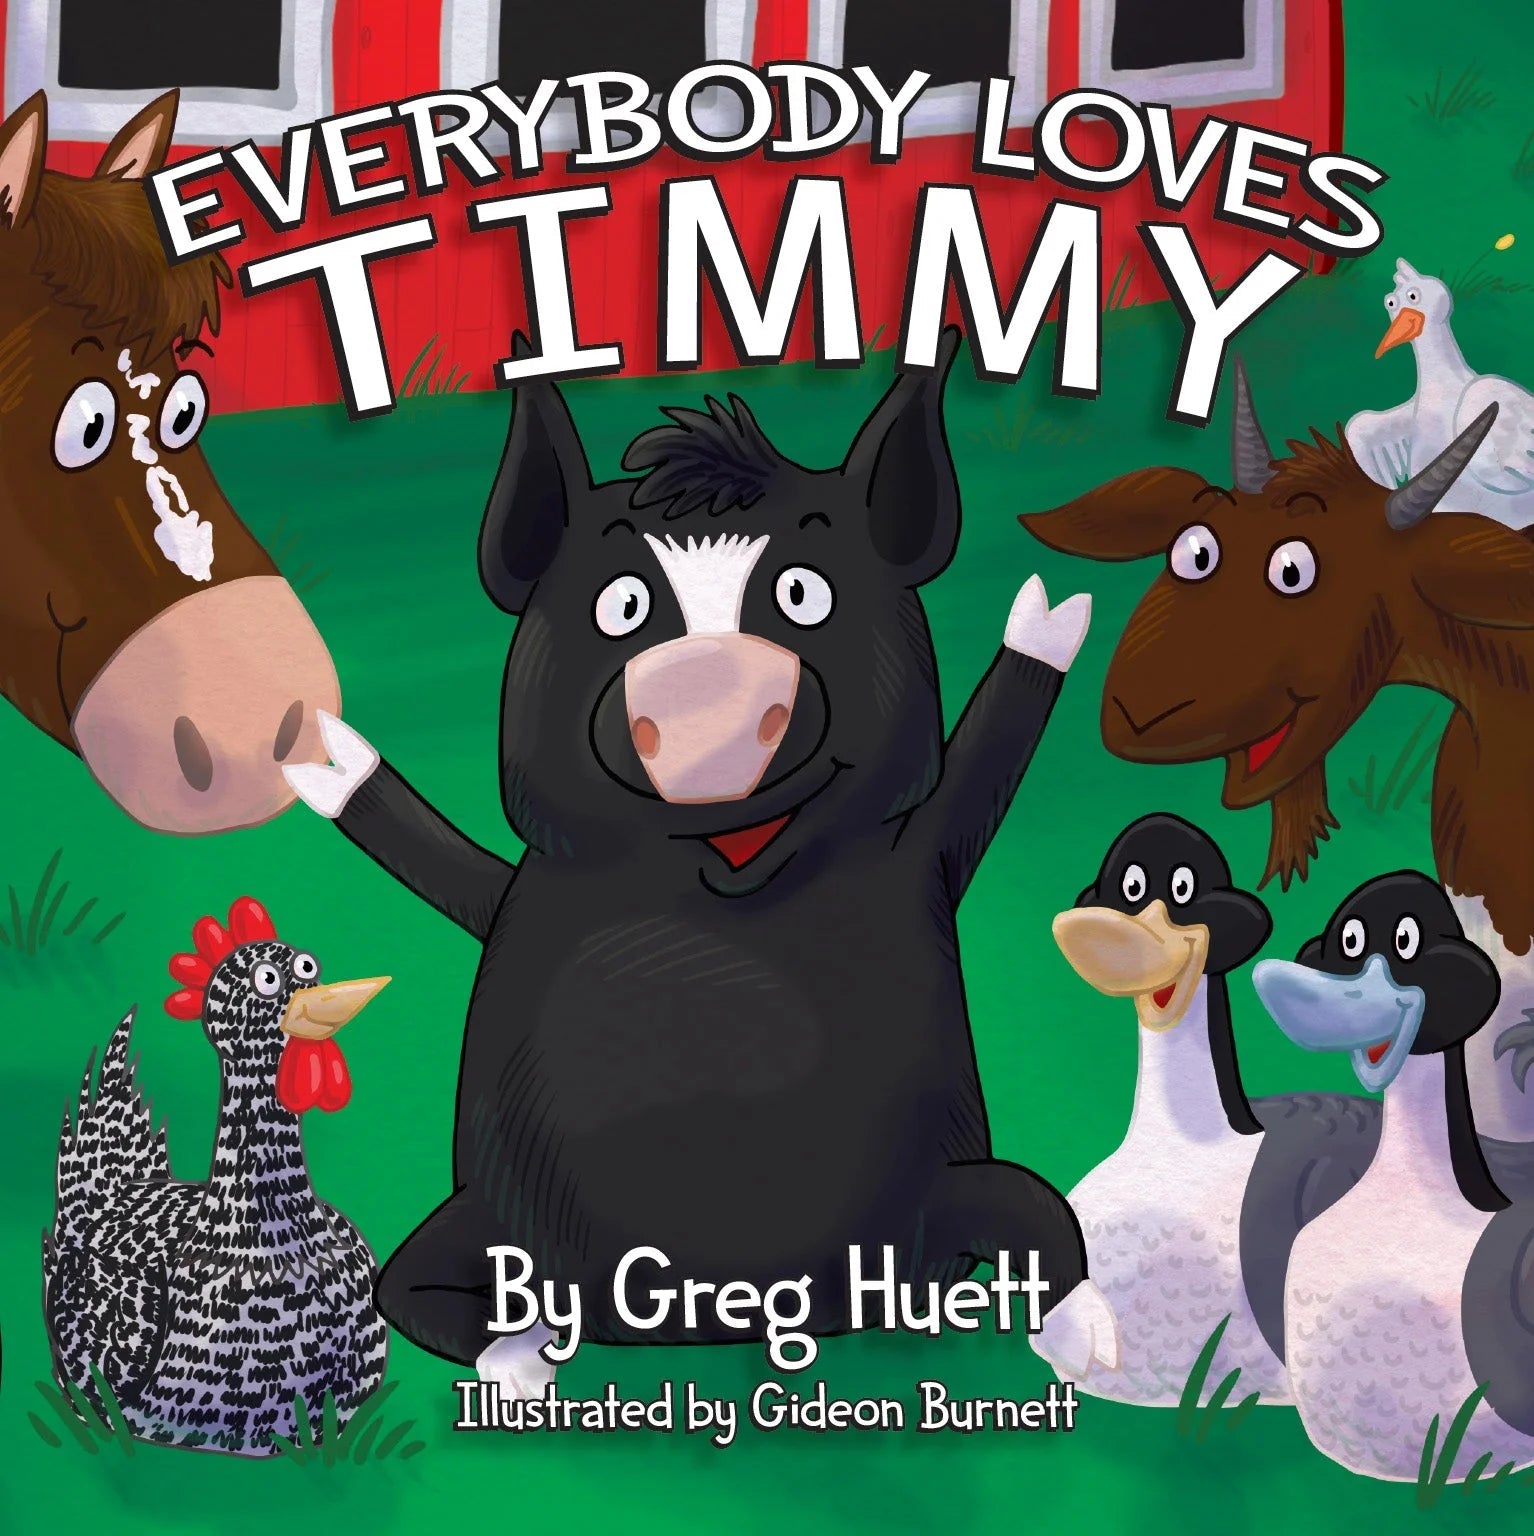 Big Country Toys Hardcover Book "Everybody Loves Timmy"-BIG COUNTRY TOYS-Little Giant Kidz